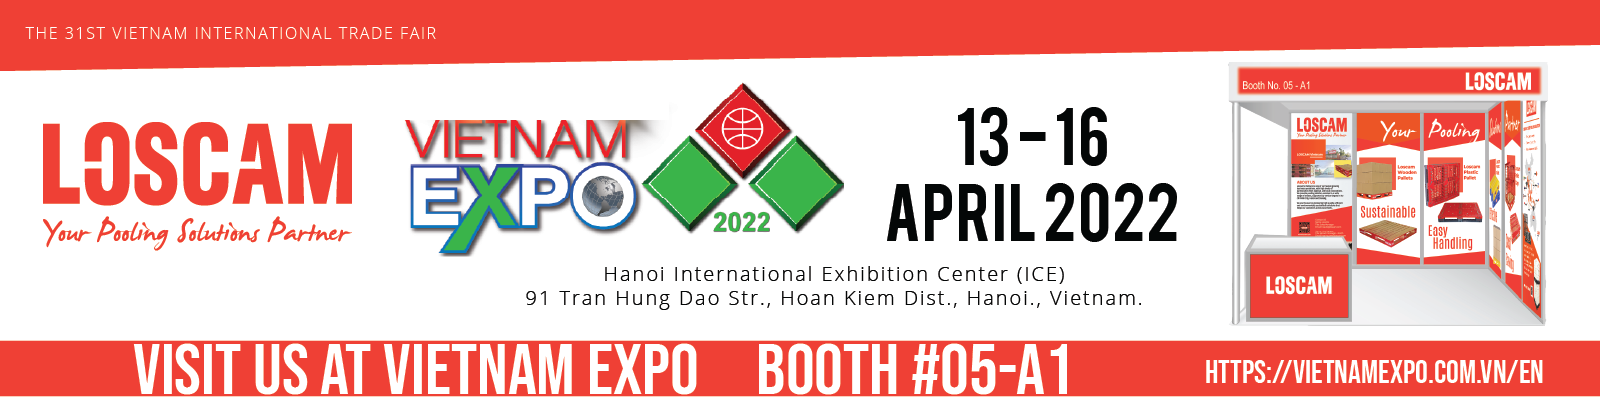 Vn Expo 2022 Email Signature Banner4x